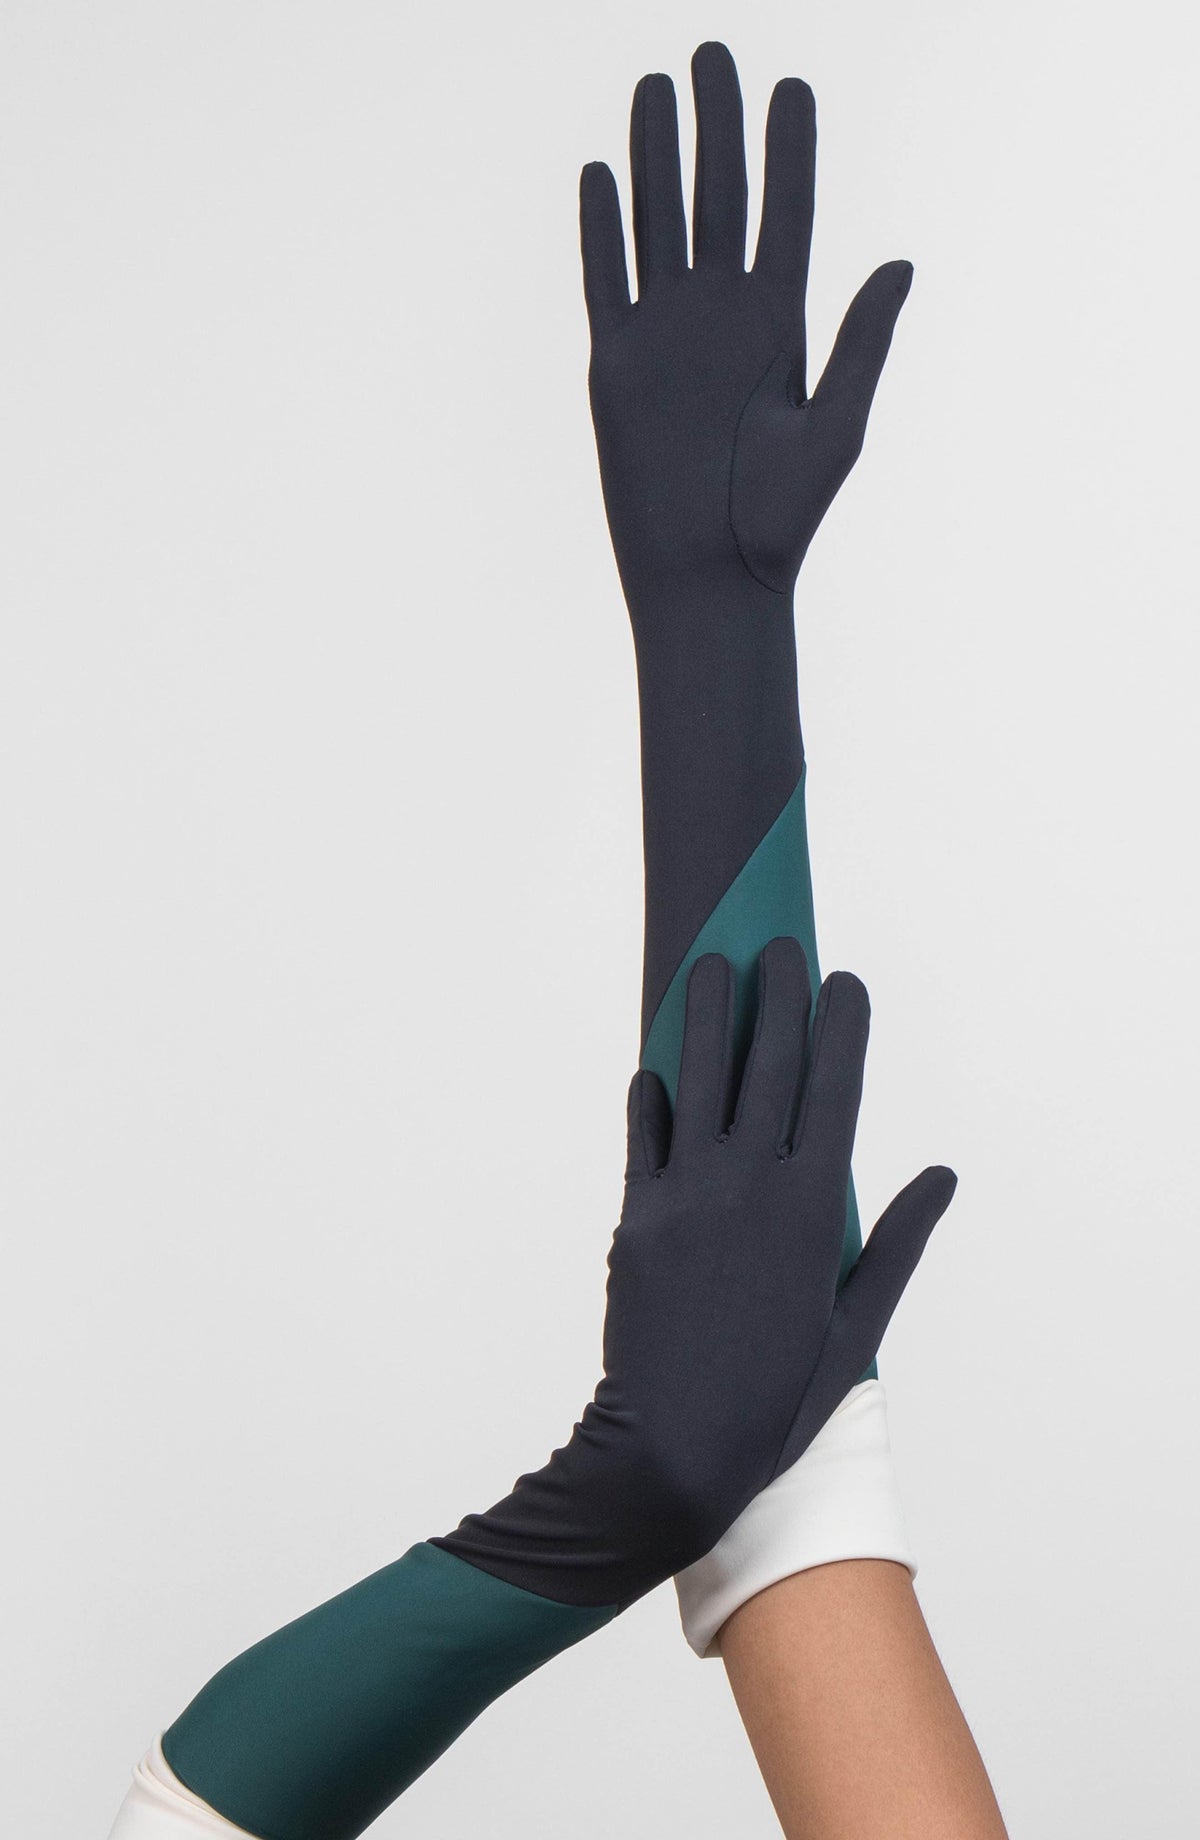 Colorblock Recycled Nylon Runway Glove by Seymoure Gloves.